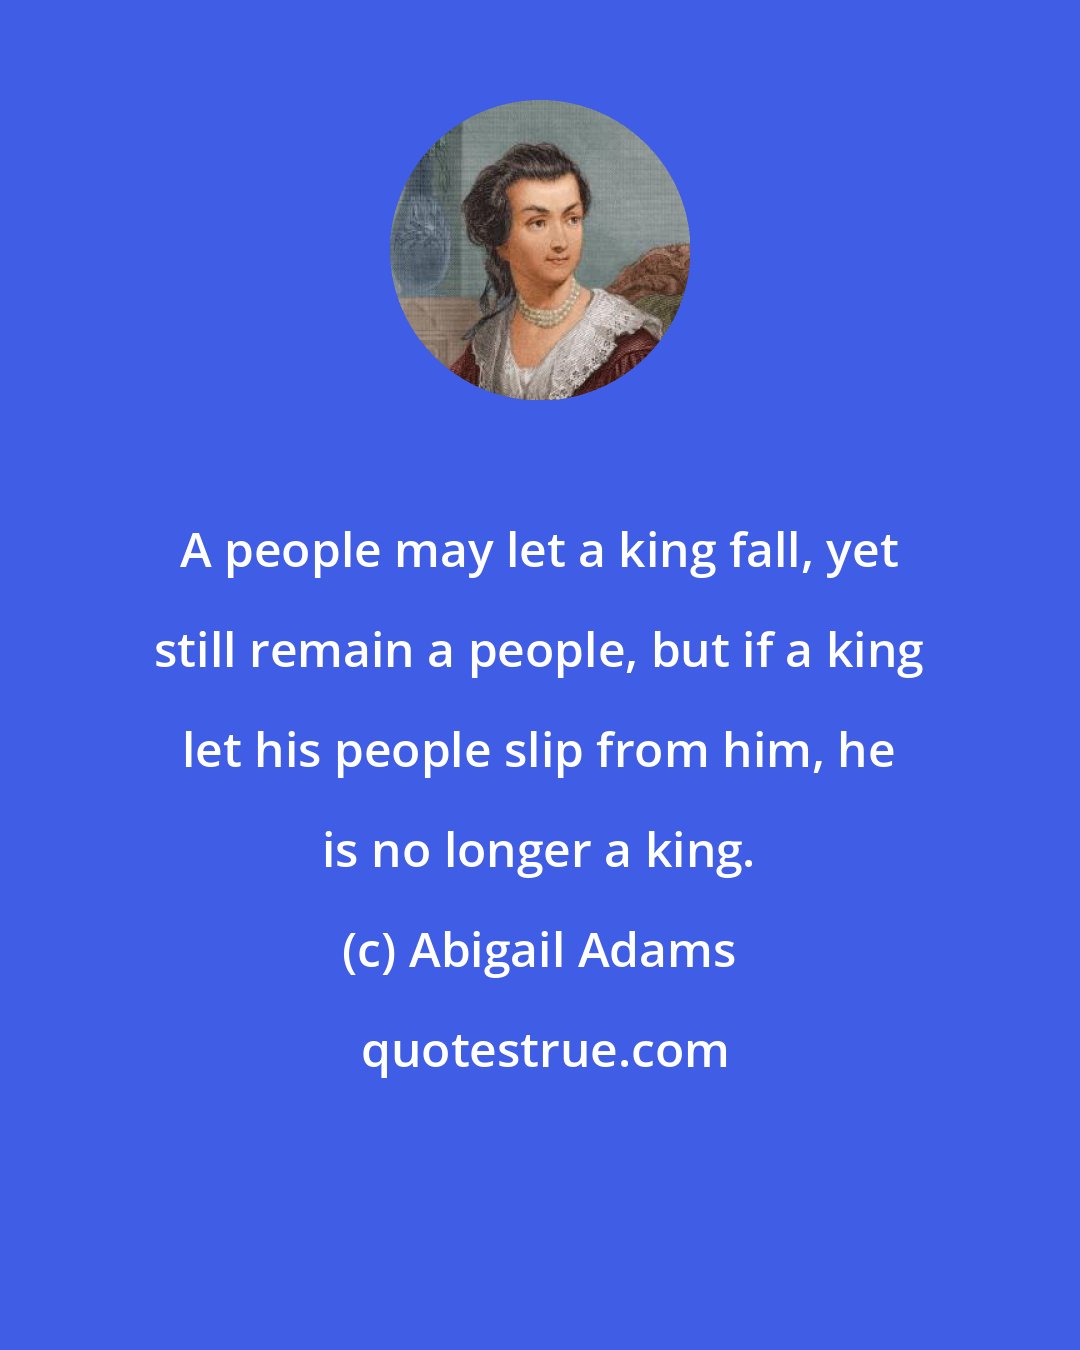 Abigail Adams: A people may let a king fall, yet still remain a people, but if a king let his people slip from him, he is no longer a king.